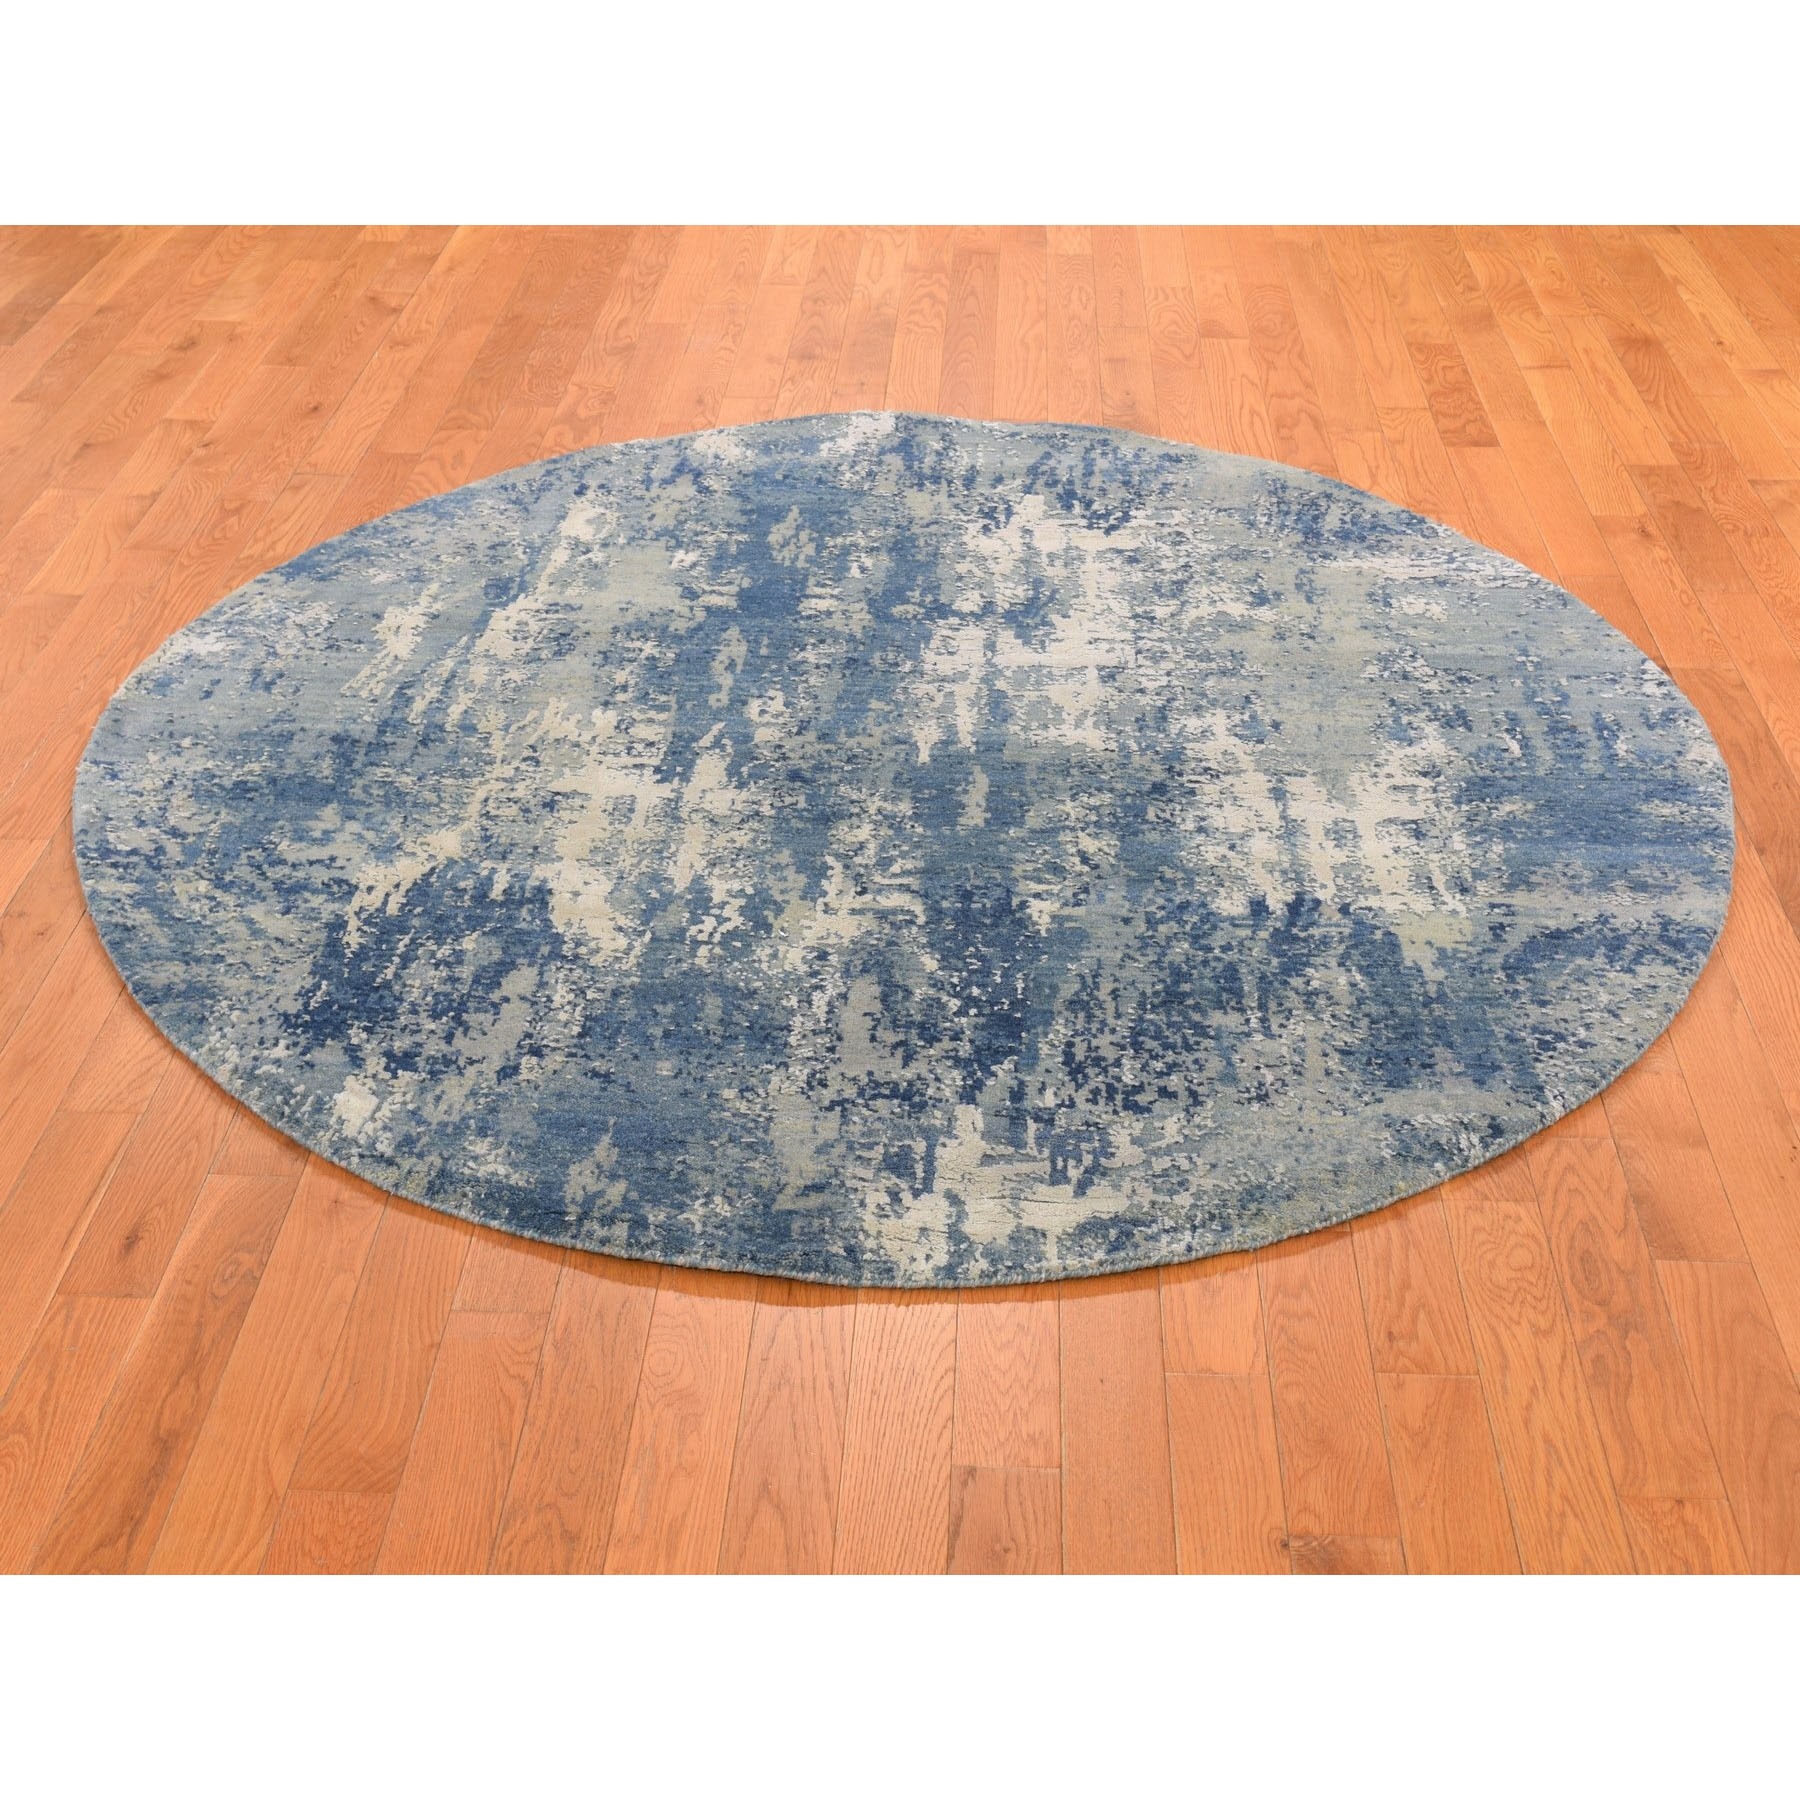 6-1 x6-1  Blue Abstract Design Wool and Pure Silk Hand Knotted Round Oriental Rug 